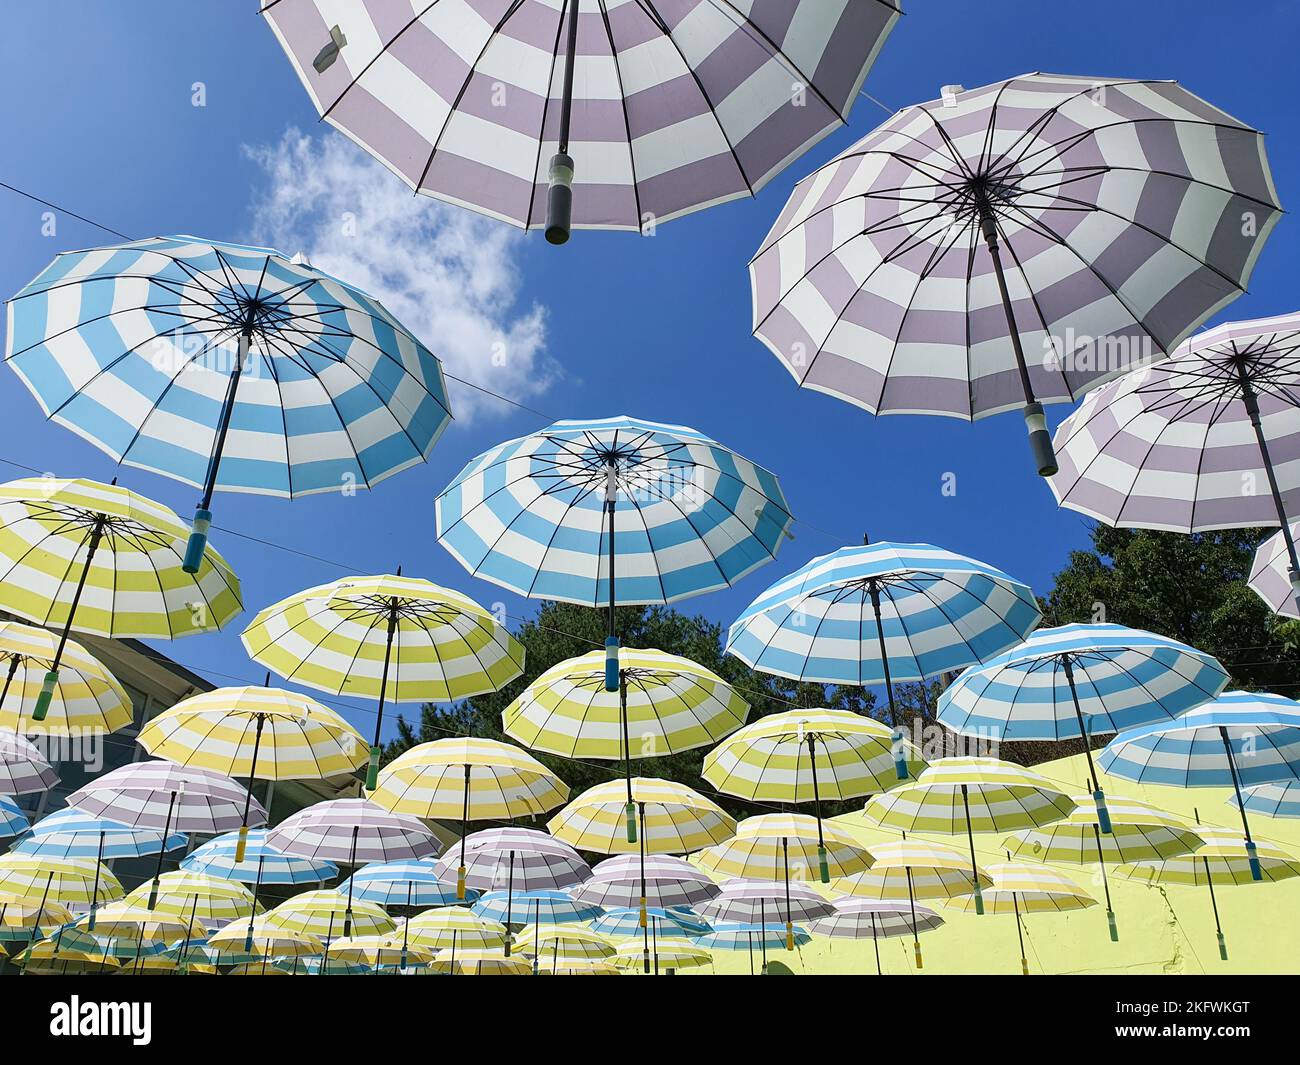 hanging colorful pastel tone umbrellas in the blue sky Stock Photo